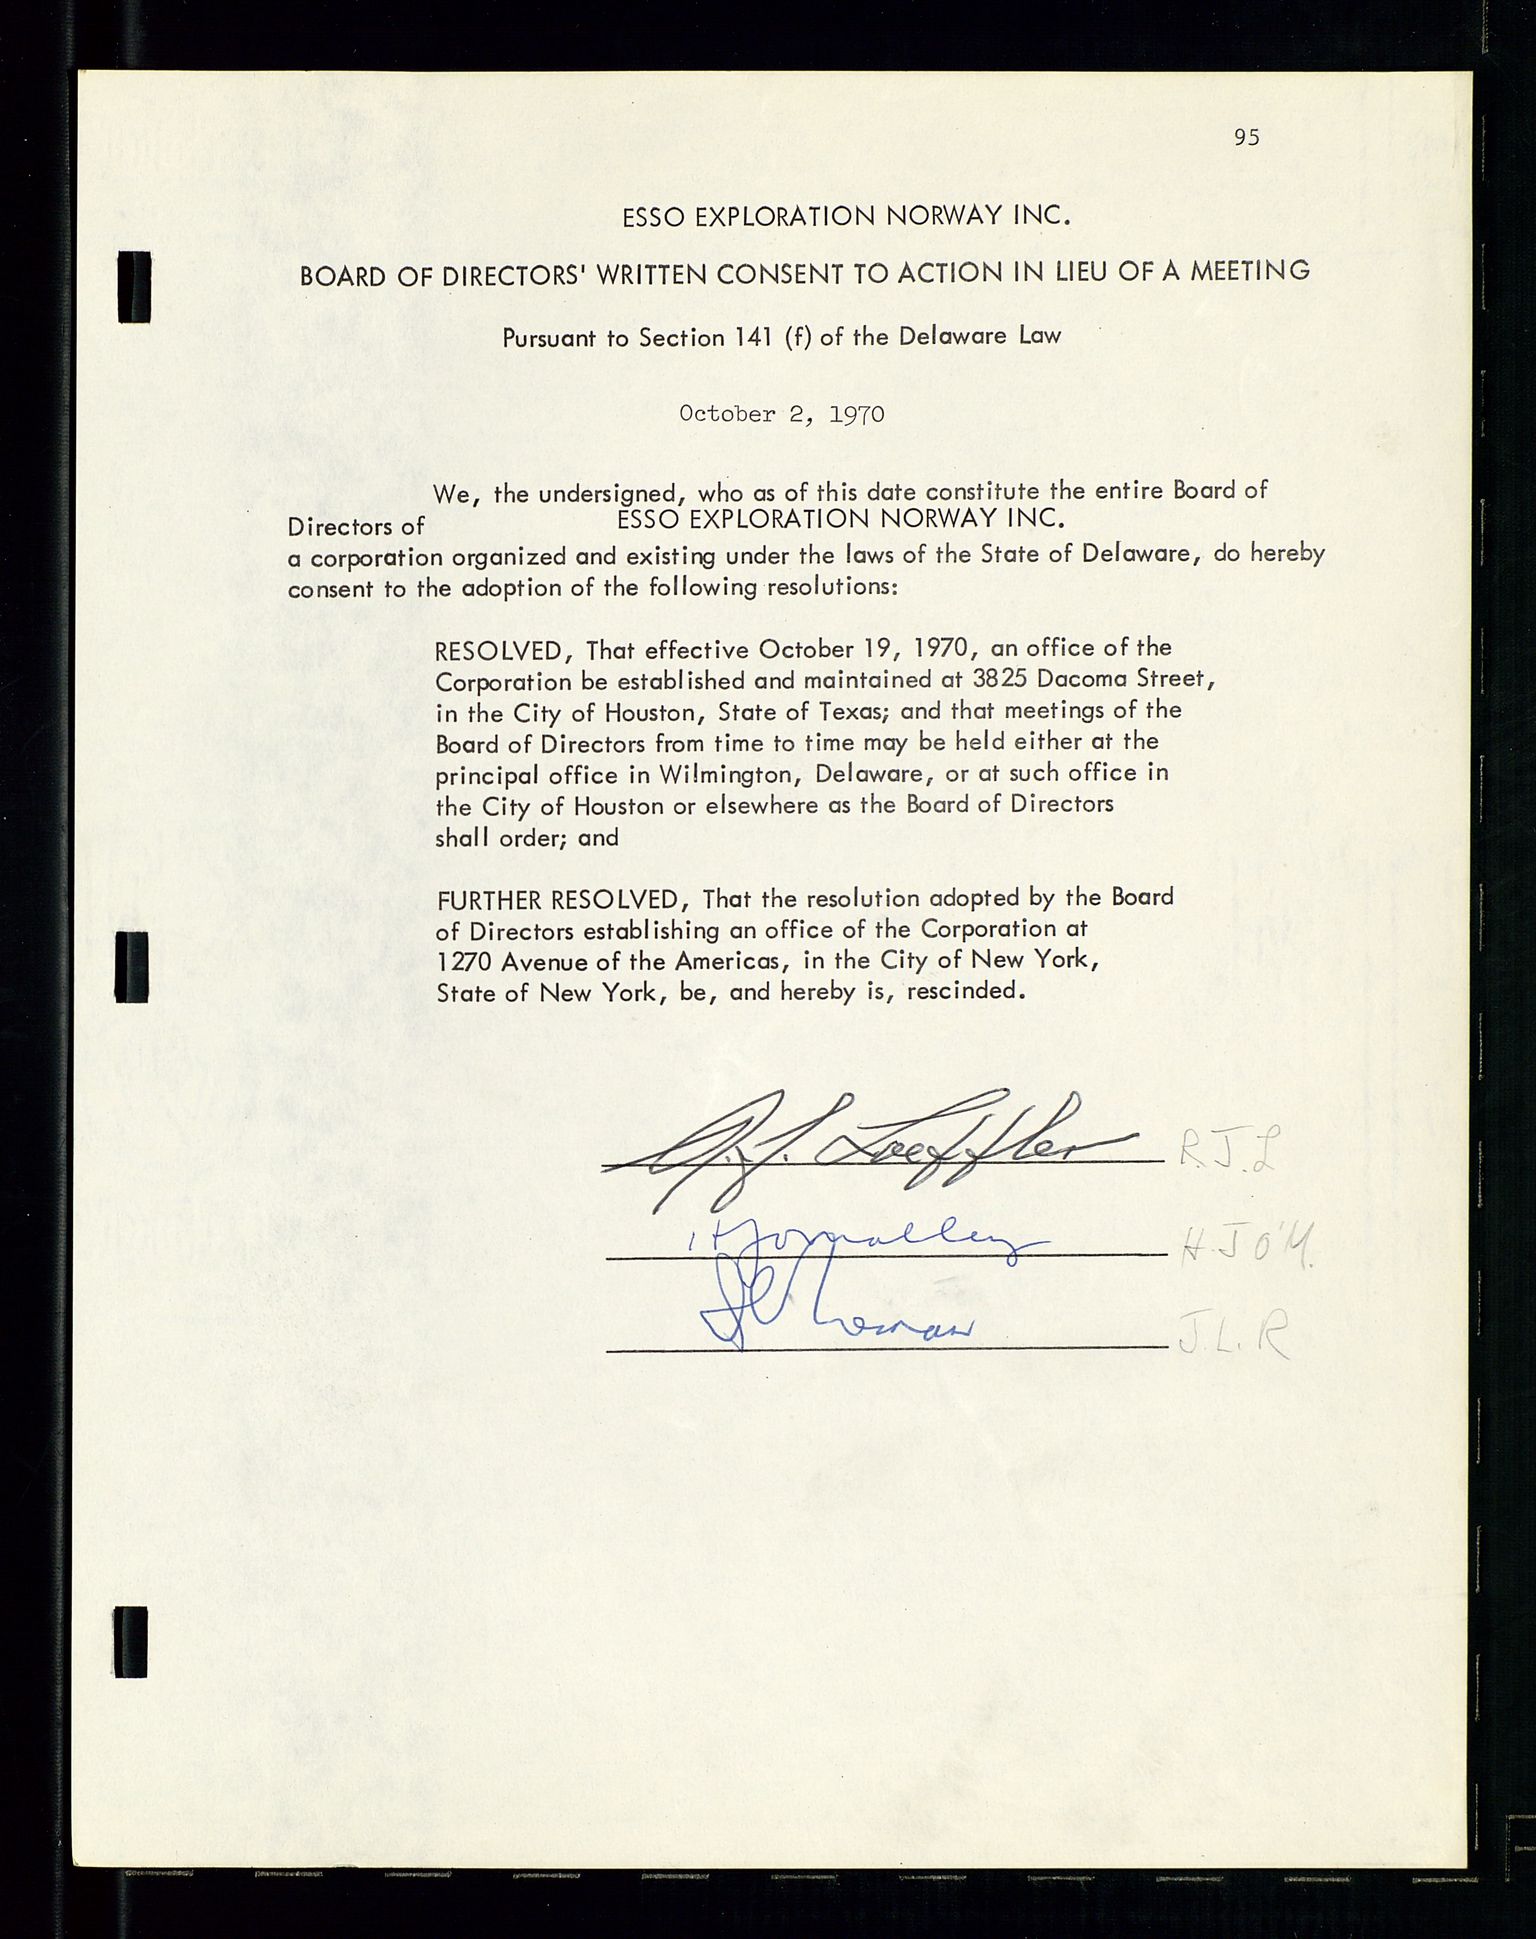 Pa 1512 - Esso Exploration and Production Norway Inc., SAST/A-101917/A/Aa/L0001/0001: Styredokumenter / Corporate records, By-Laws, Board meeting minutes, Incorporations, 1965-1975, p. 95